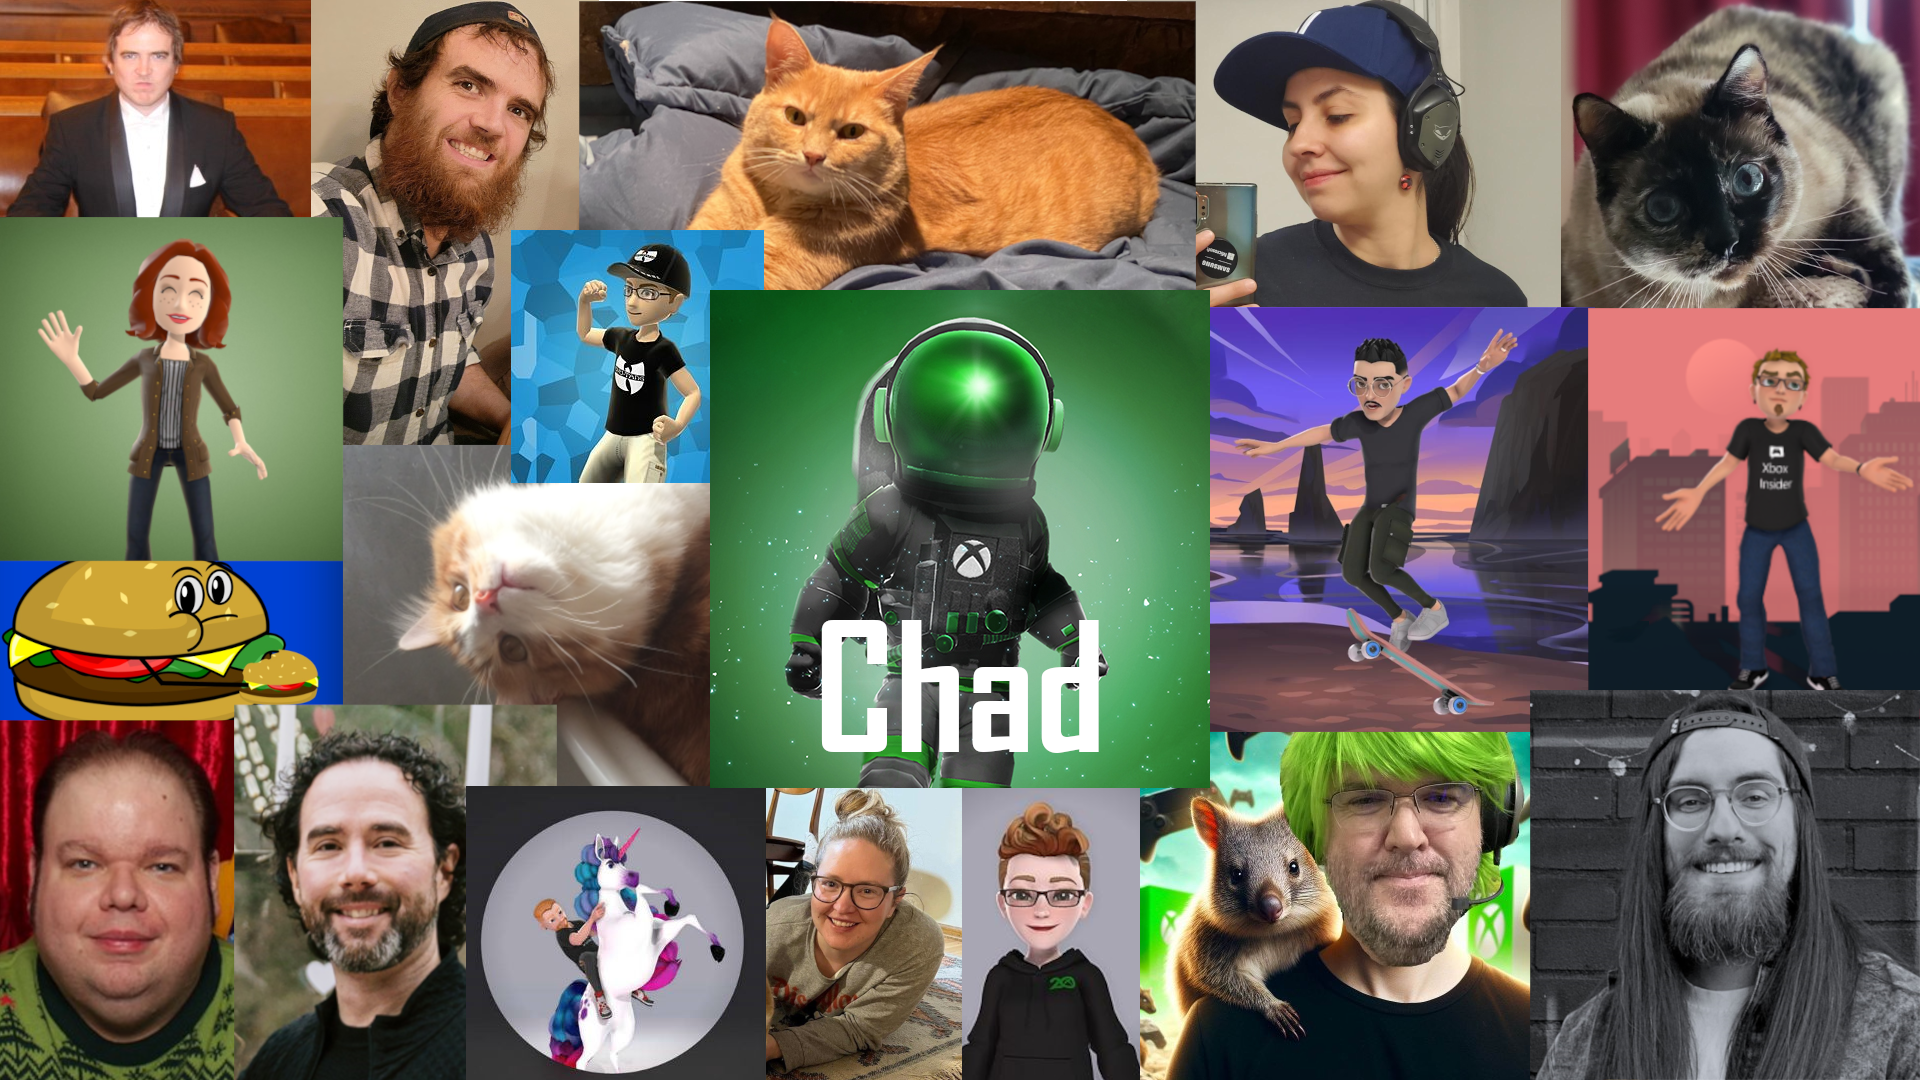 Get To Know Our Workforce: Chad – Senior Software Engineer